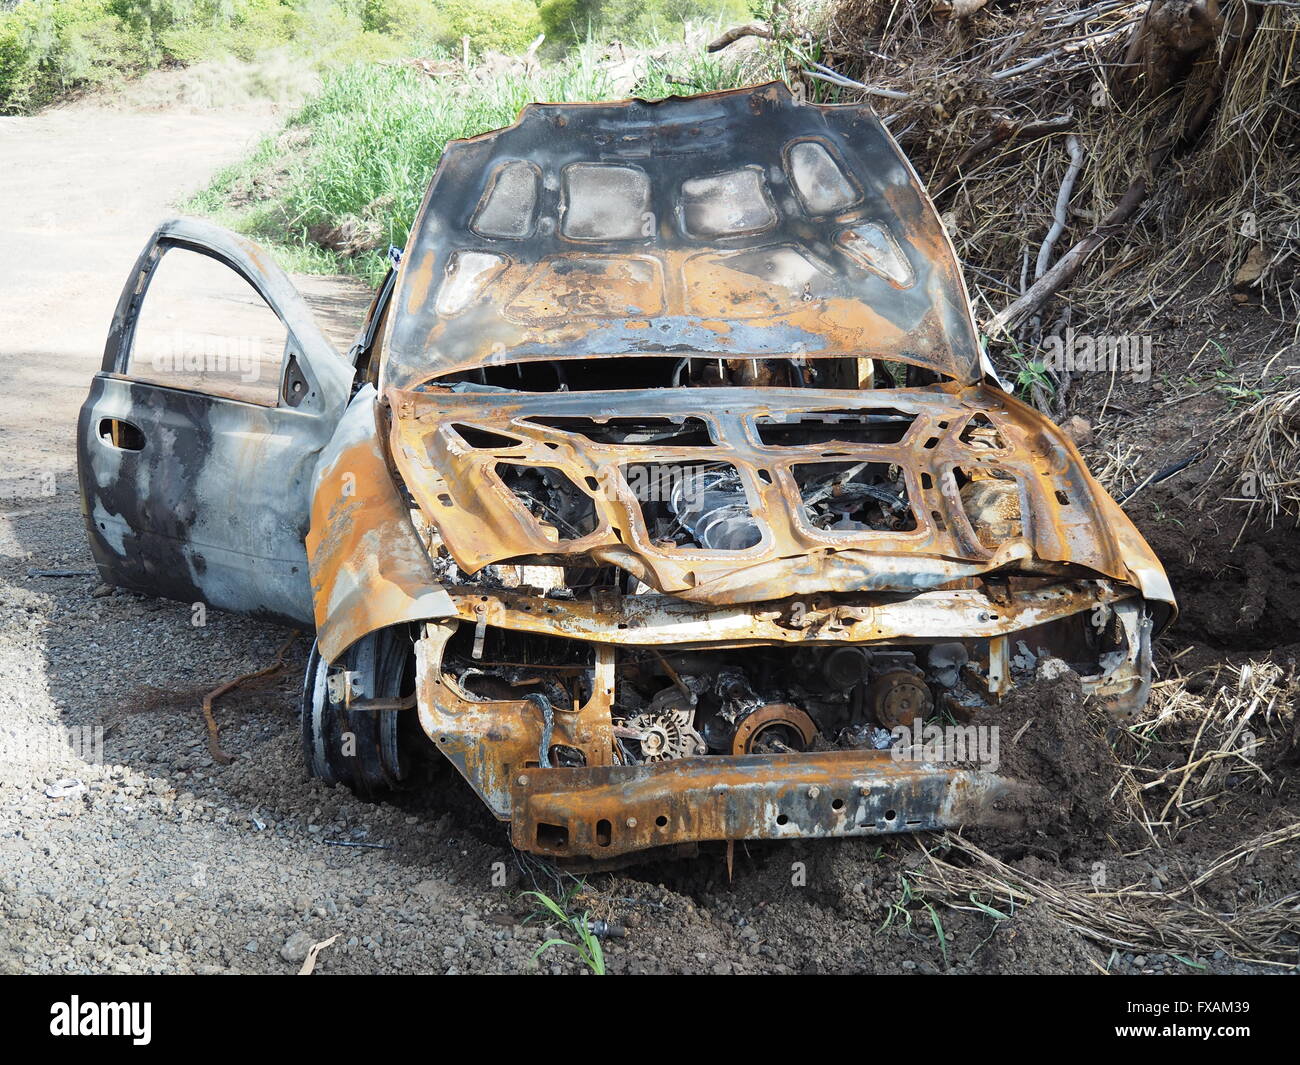 Burned out abandoned stolen Ford car from arson attack Stock Photo